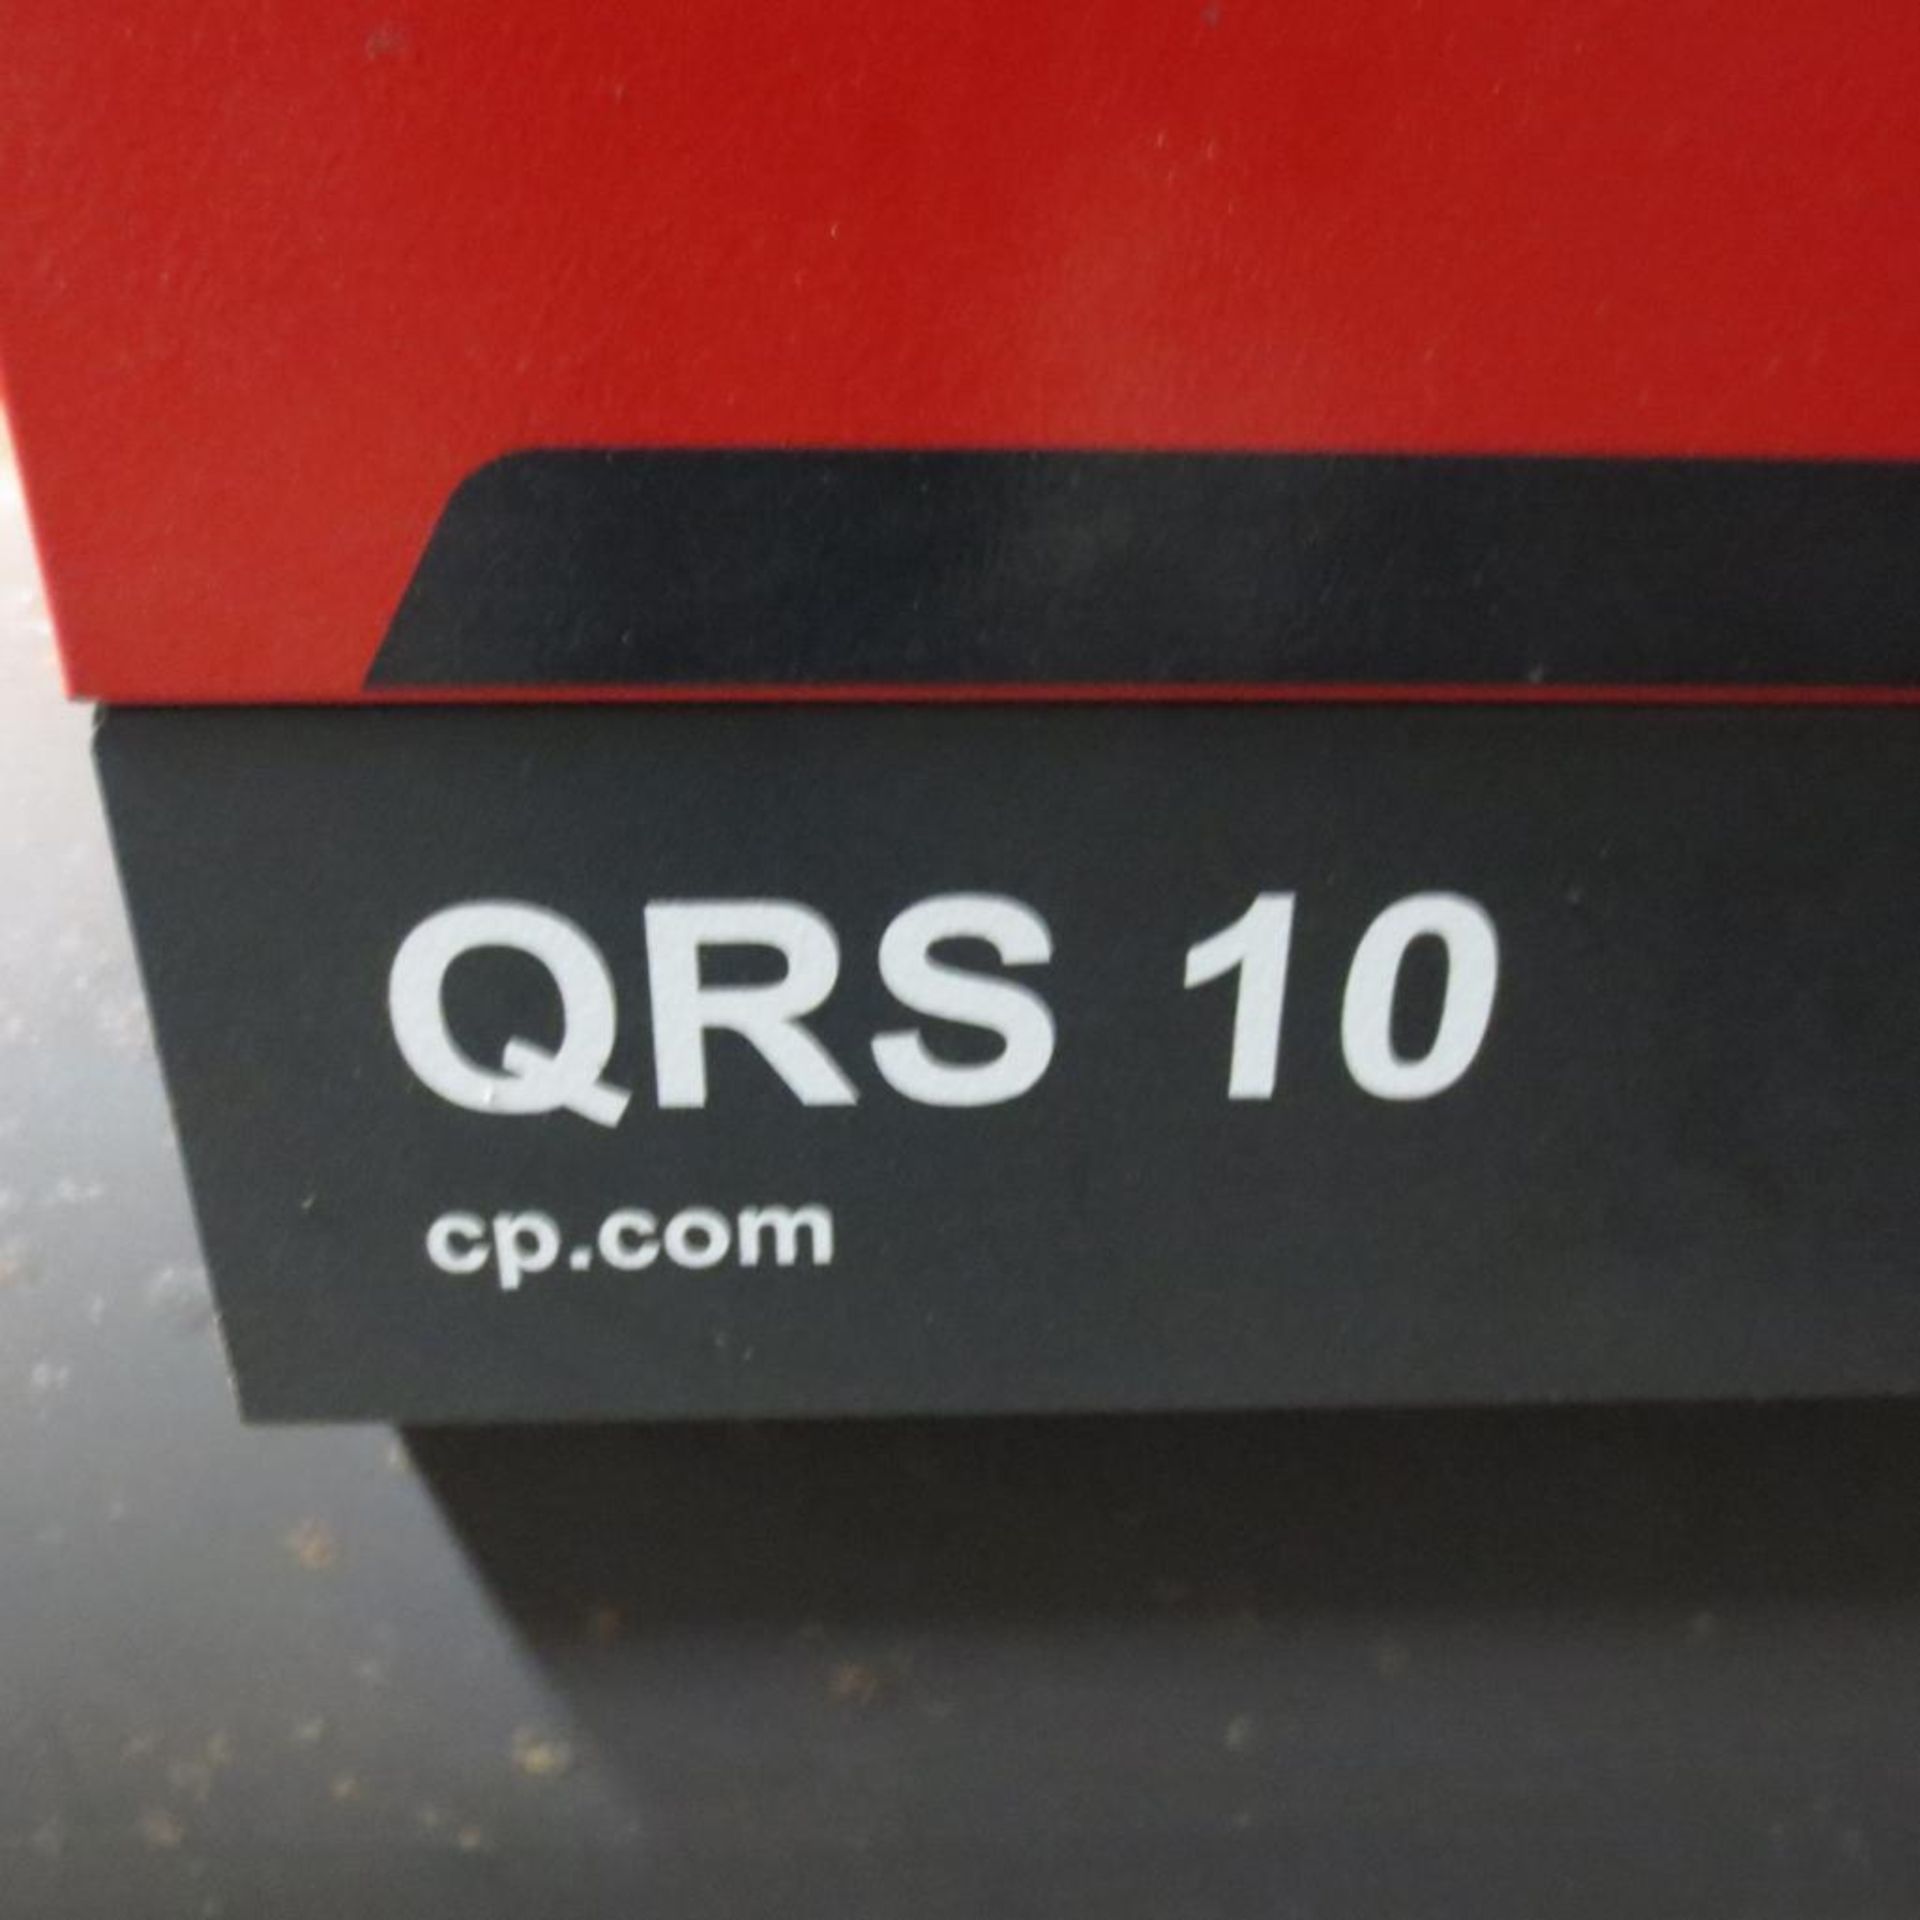 Chicago Pneumatic Air Compressor Model QRS 10, Year 2011, 15258 HR, 460V, 3 PH, 10HP, S/N CA1511787 - Image 2 of 8